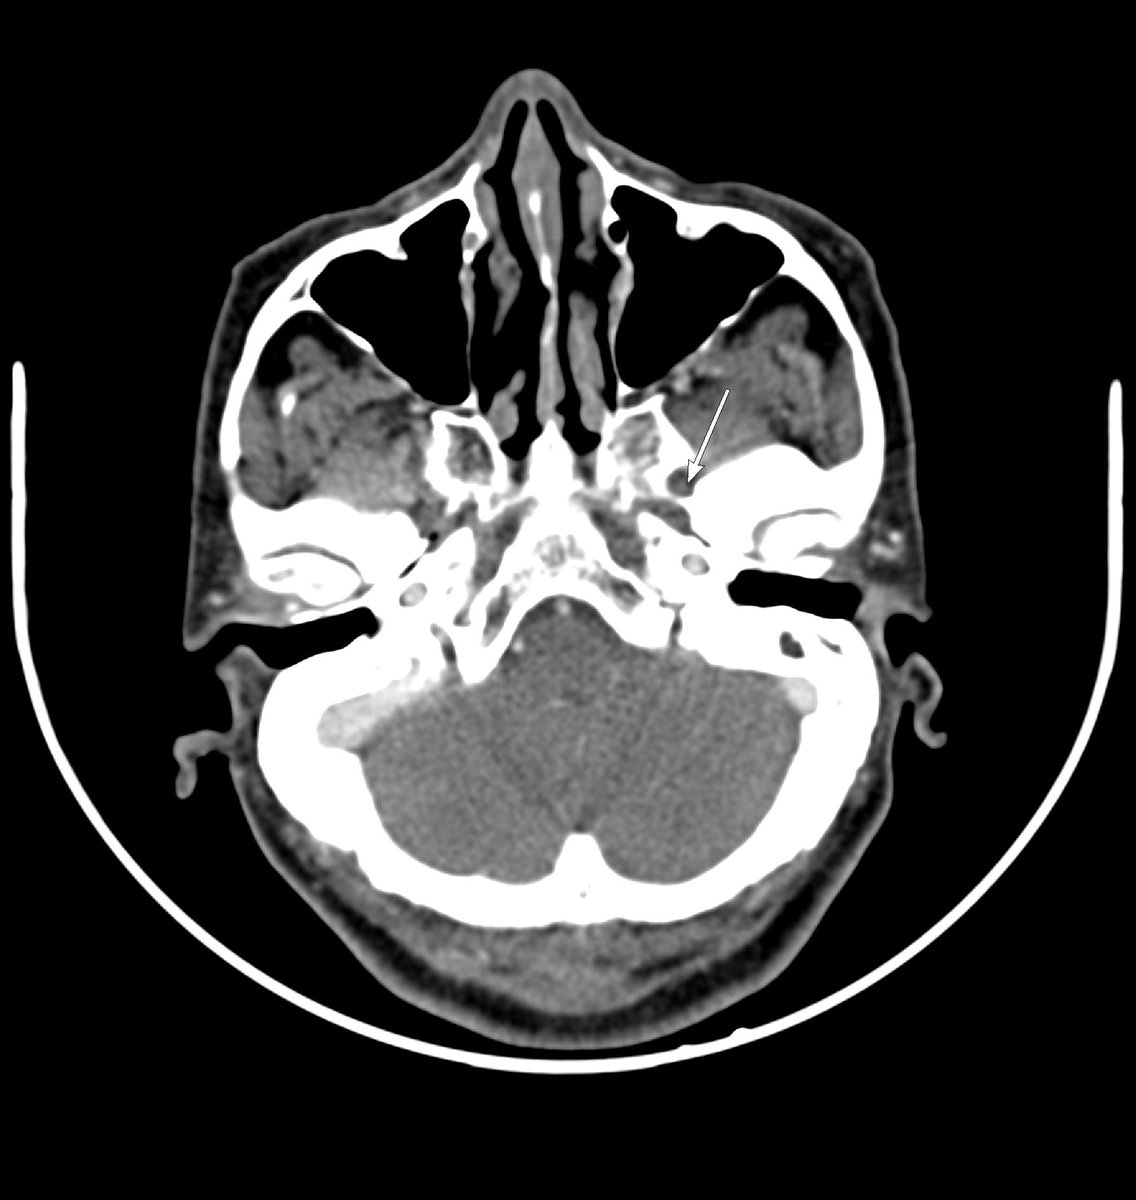 Case of Ca buccal mucosa. Identify the structure and finding (arrow). @FOAMrad @Med_FOAMed @radRounds @RadiologySigns @RADSign #Neurotwitter